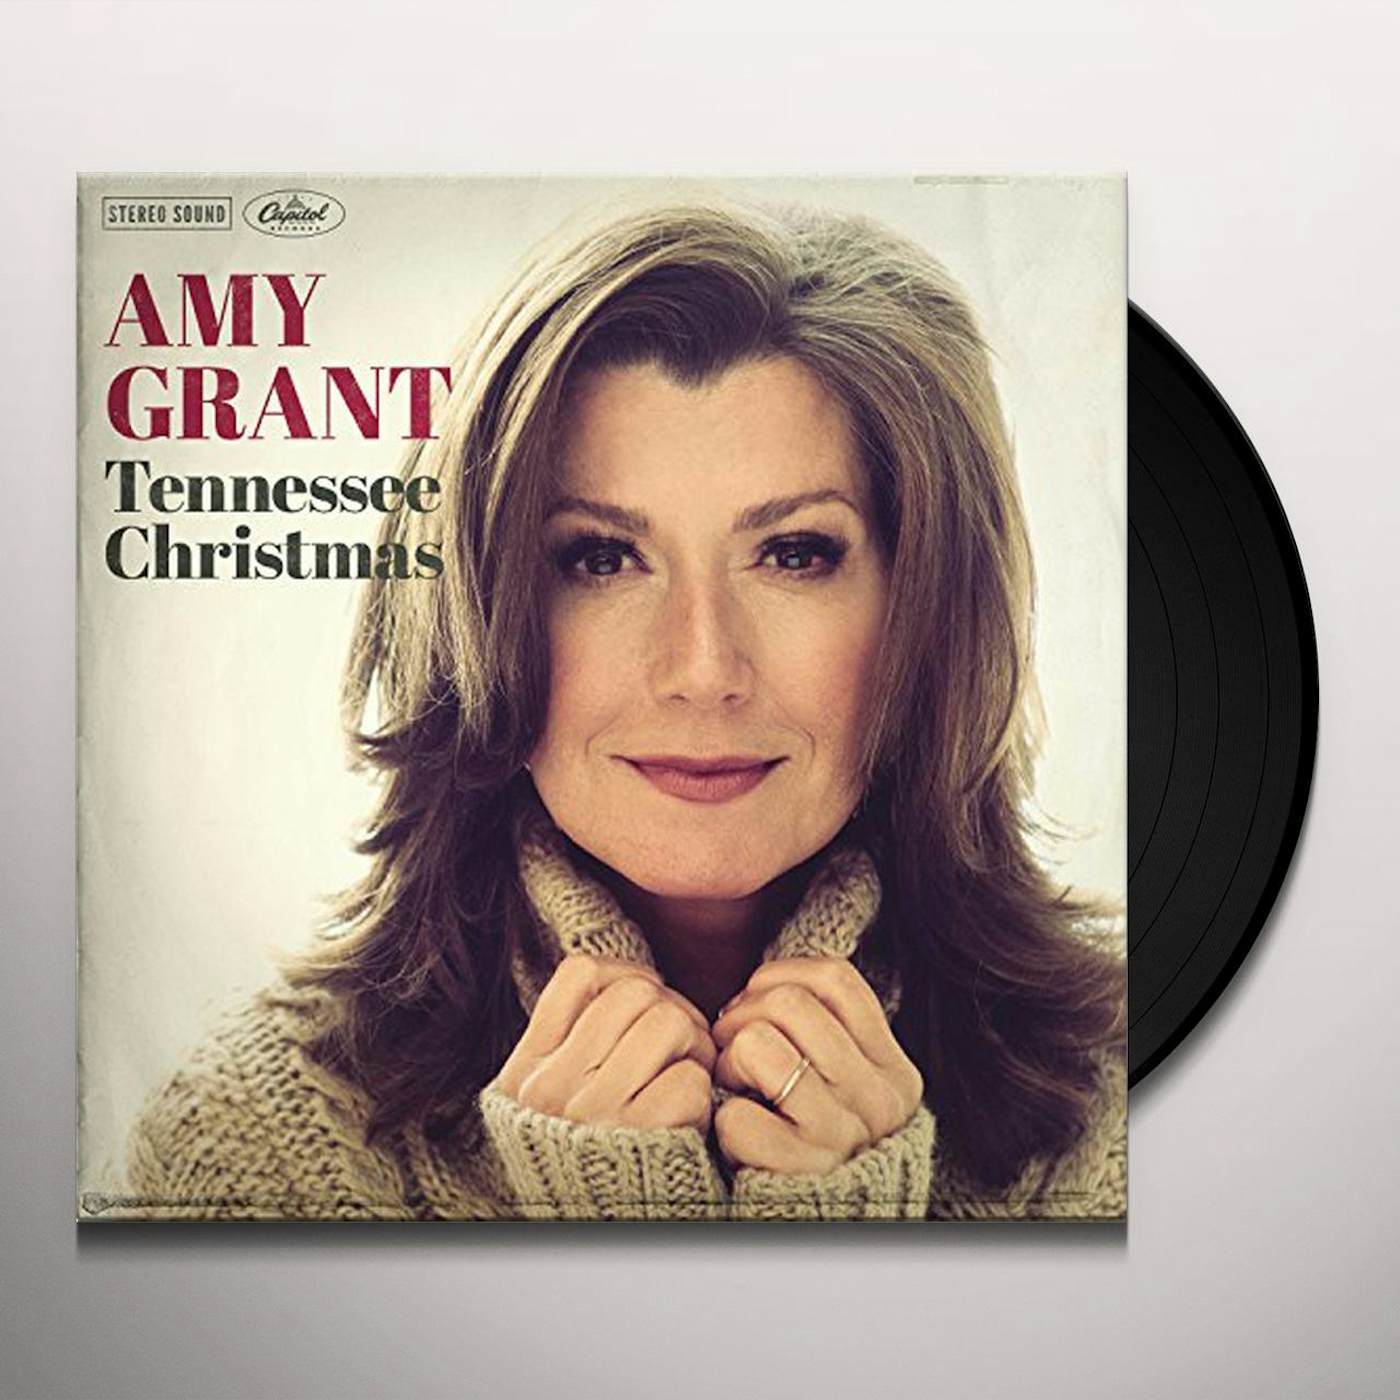 Amy Grant Tennessee Christmas Vinyl Record